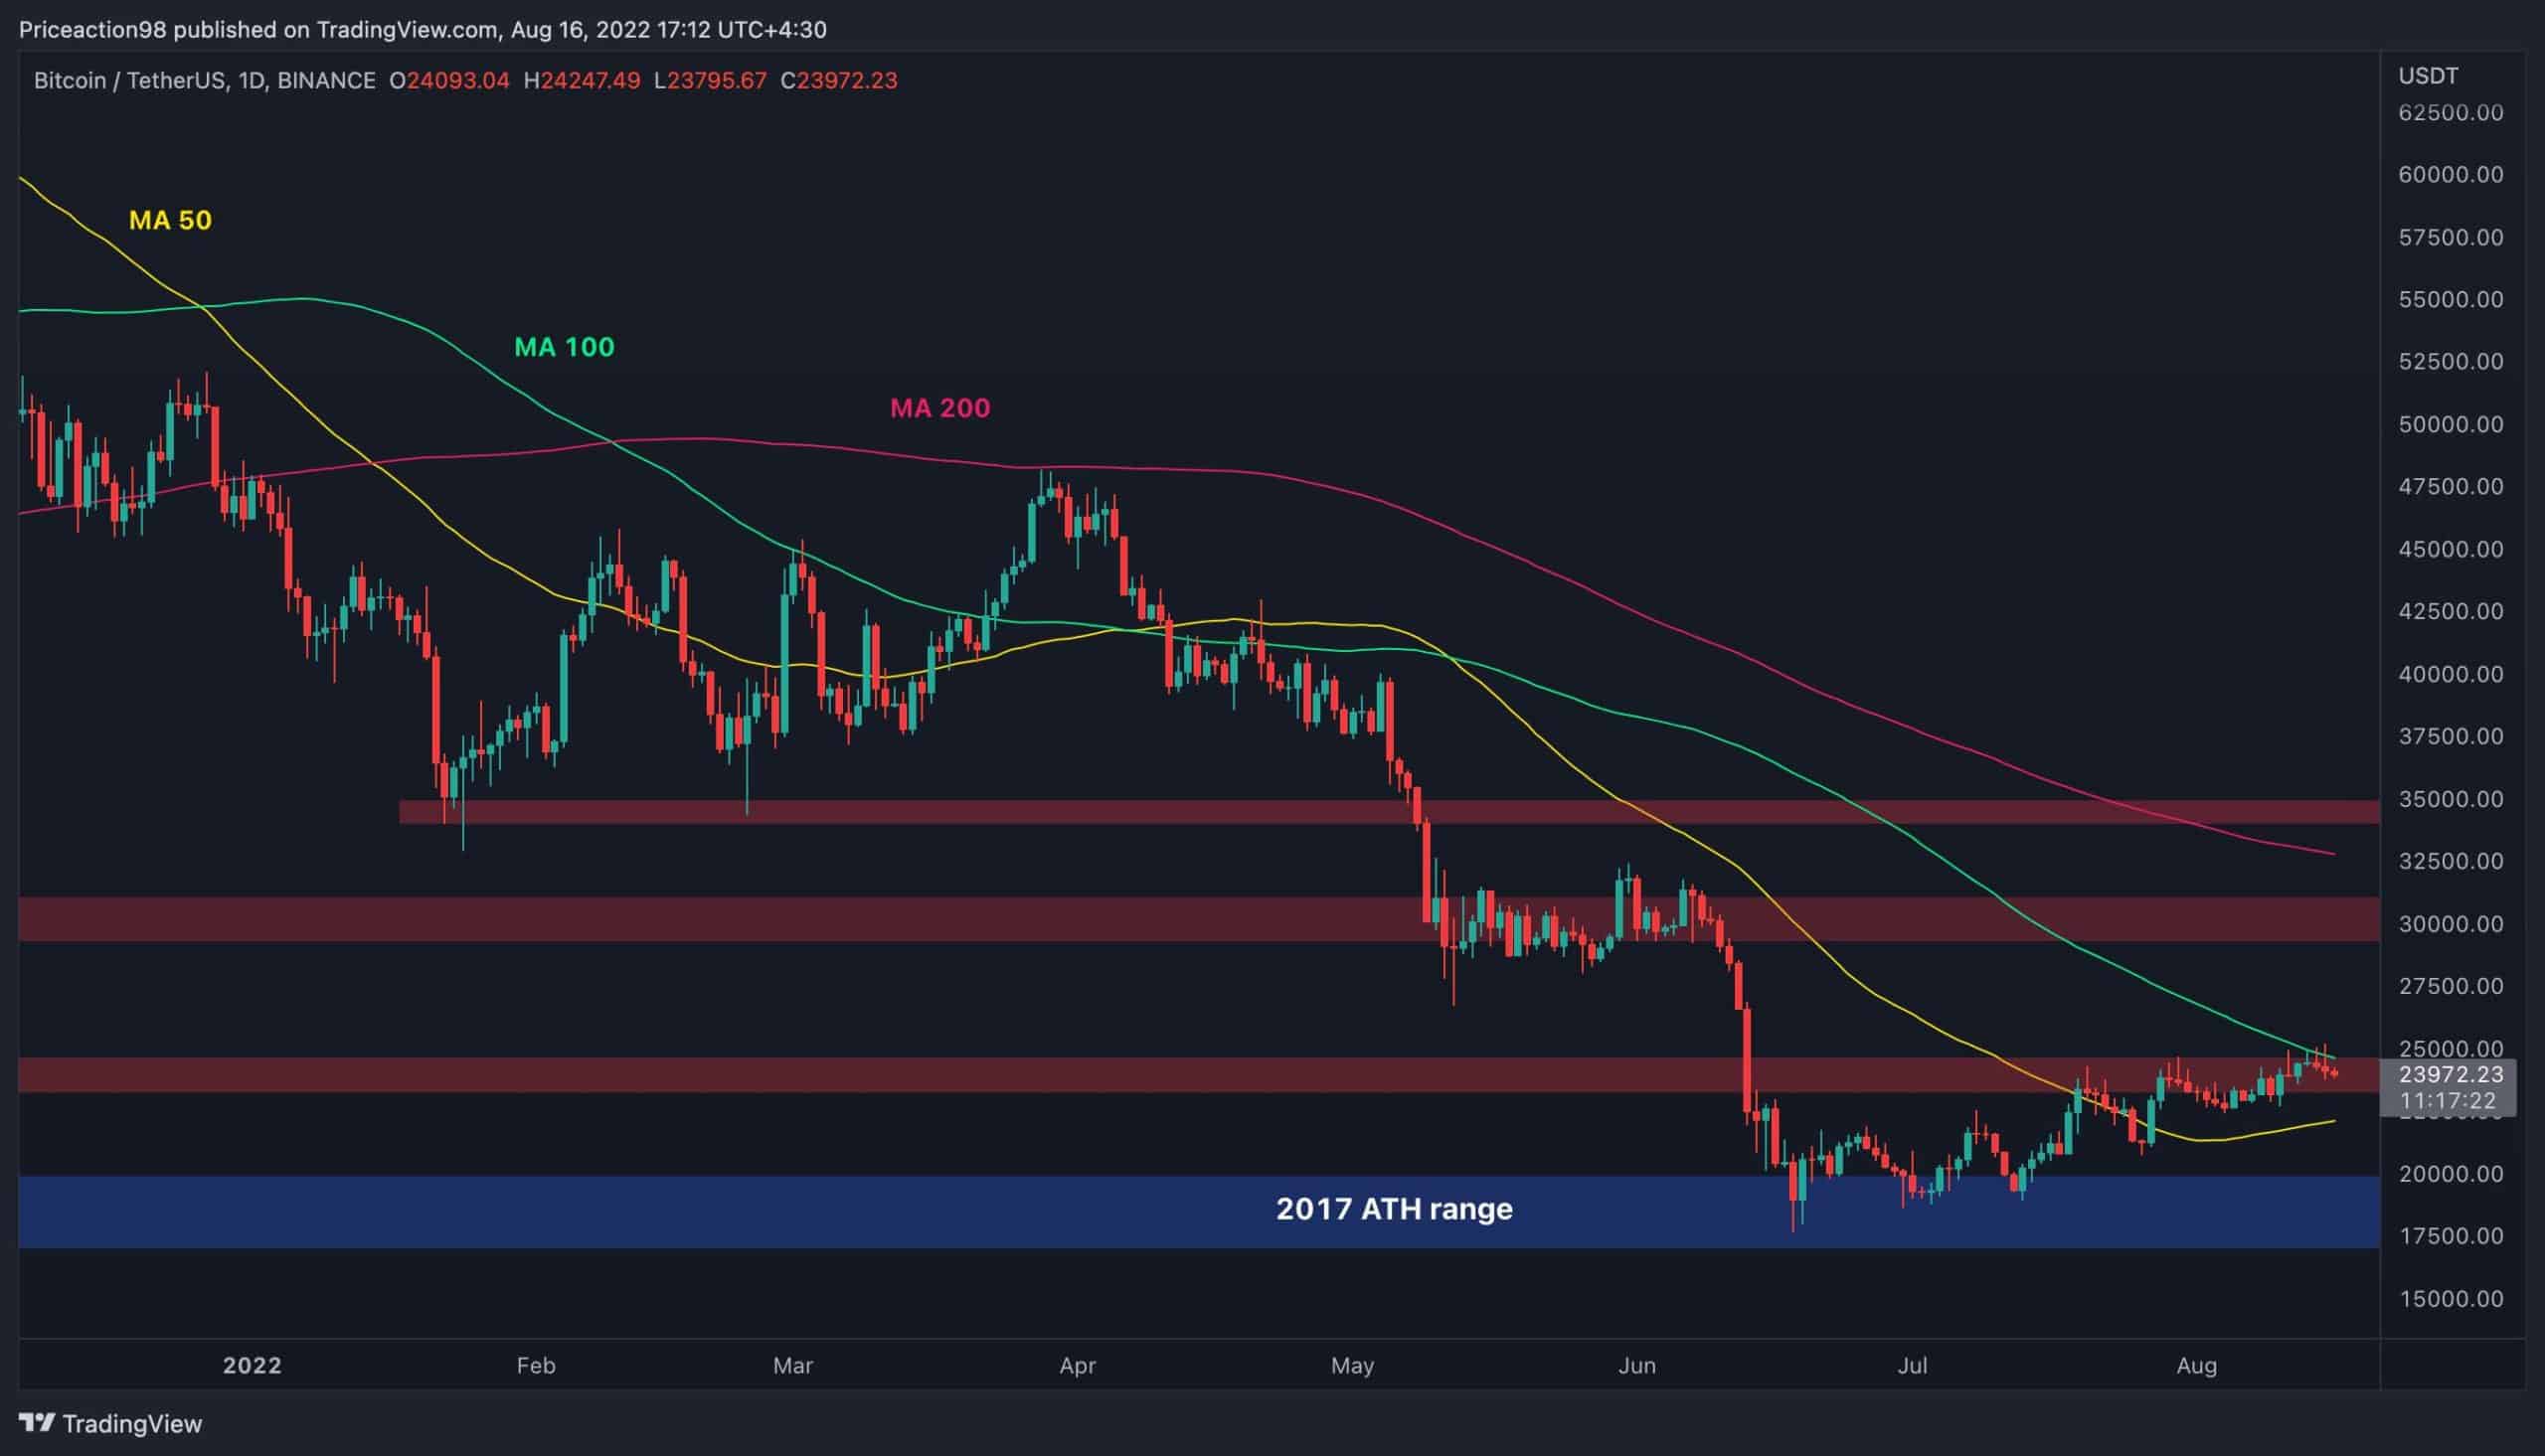 Here’s-the-first-support-if-bitcoin-fails-to-break-above-$24k-(btc-price-analysis)